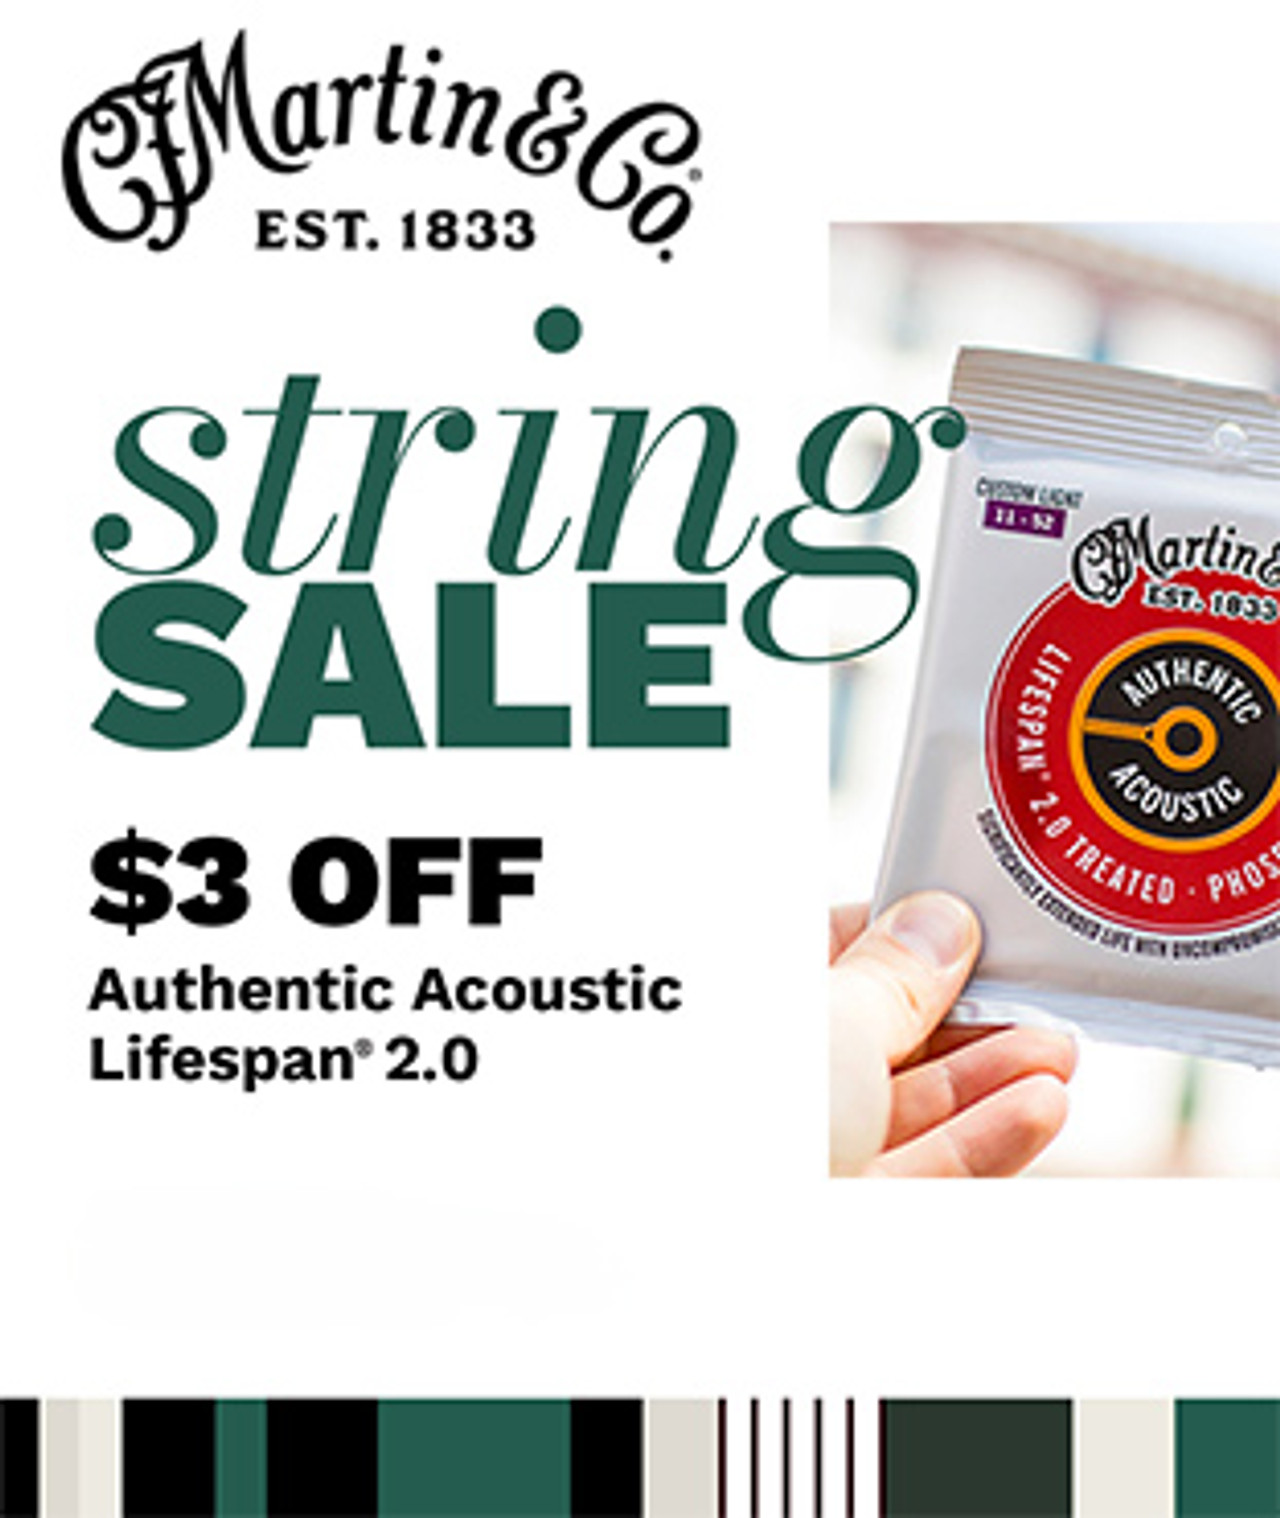 Guitar Strings and Beyond - Buy Guitar Strings Online and Save!